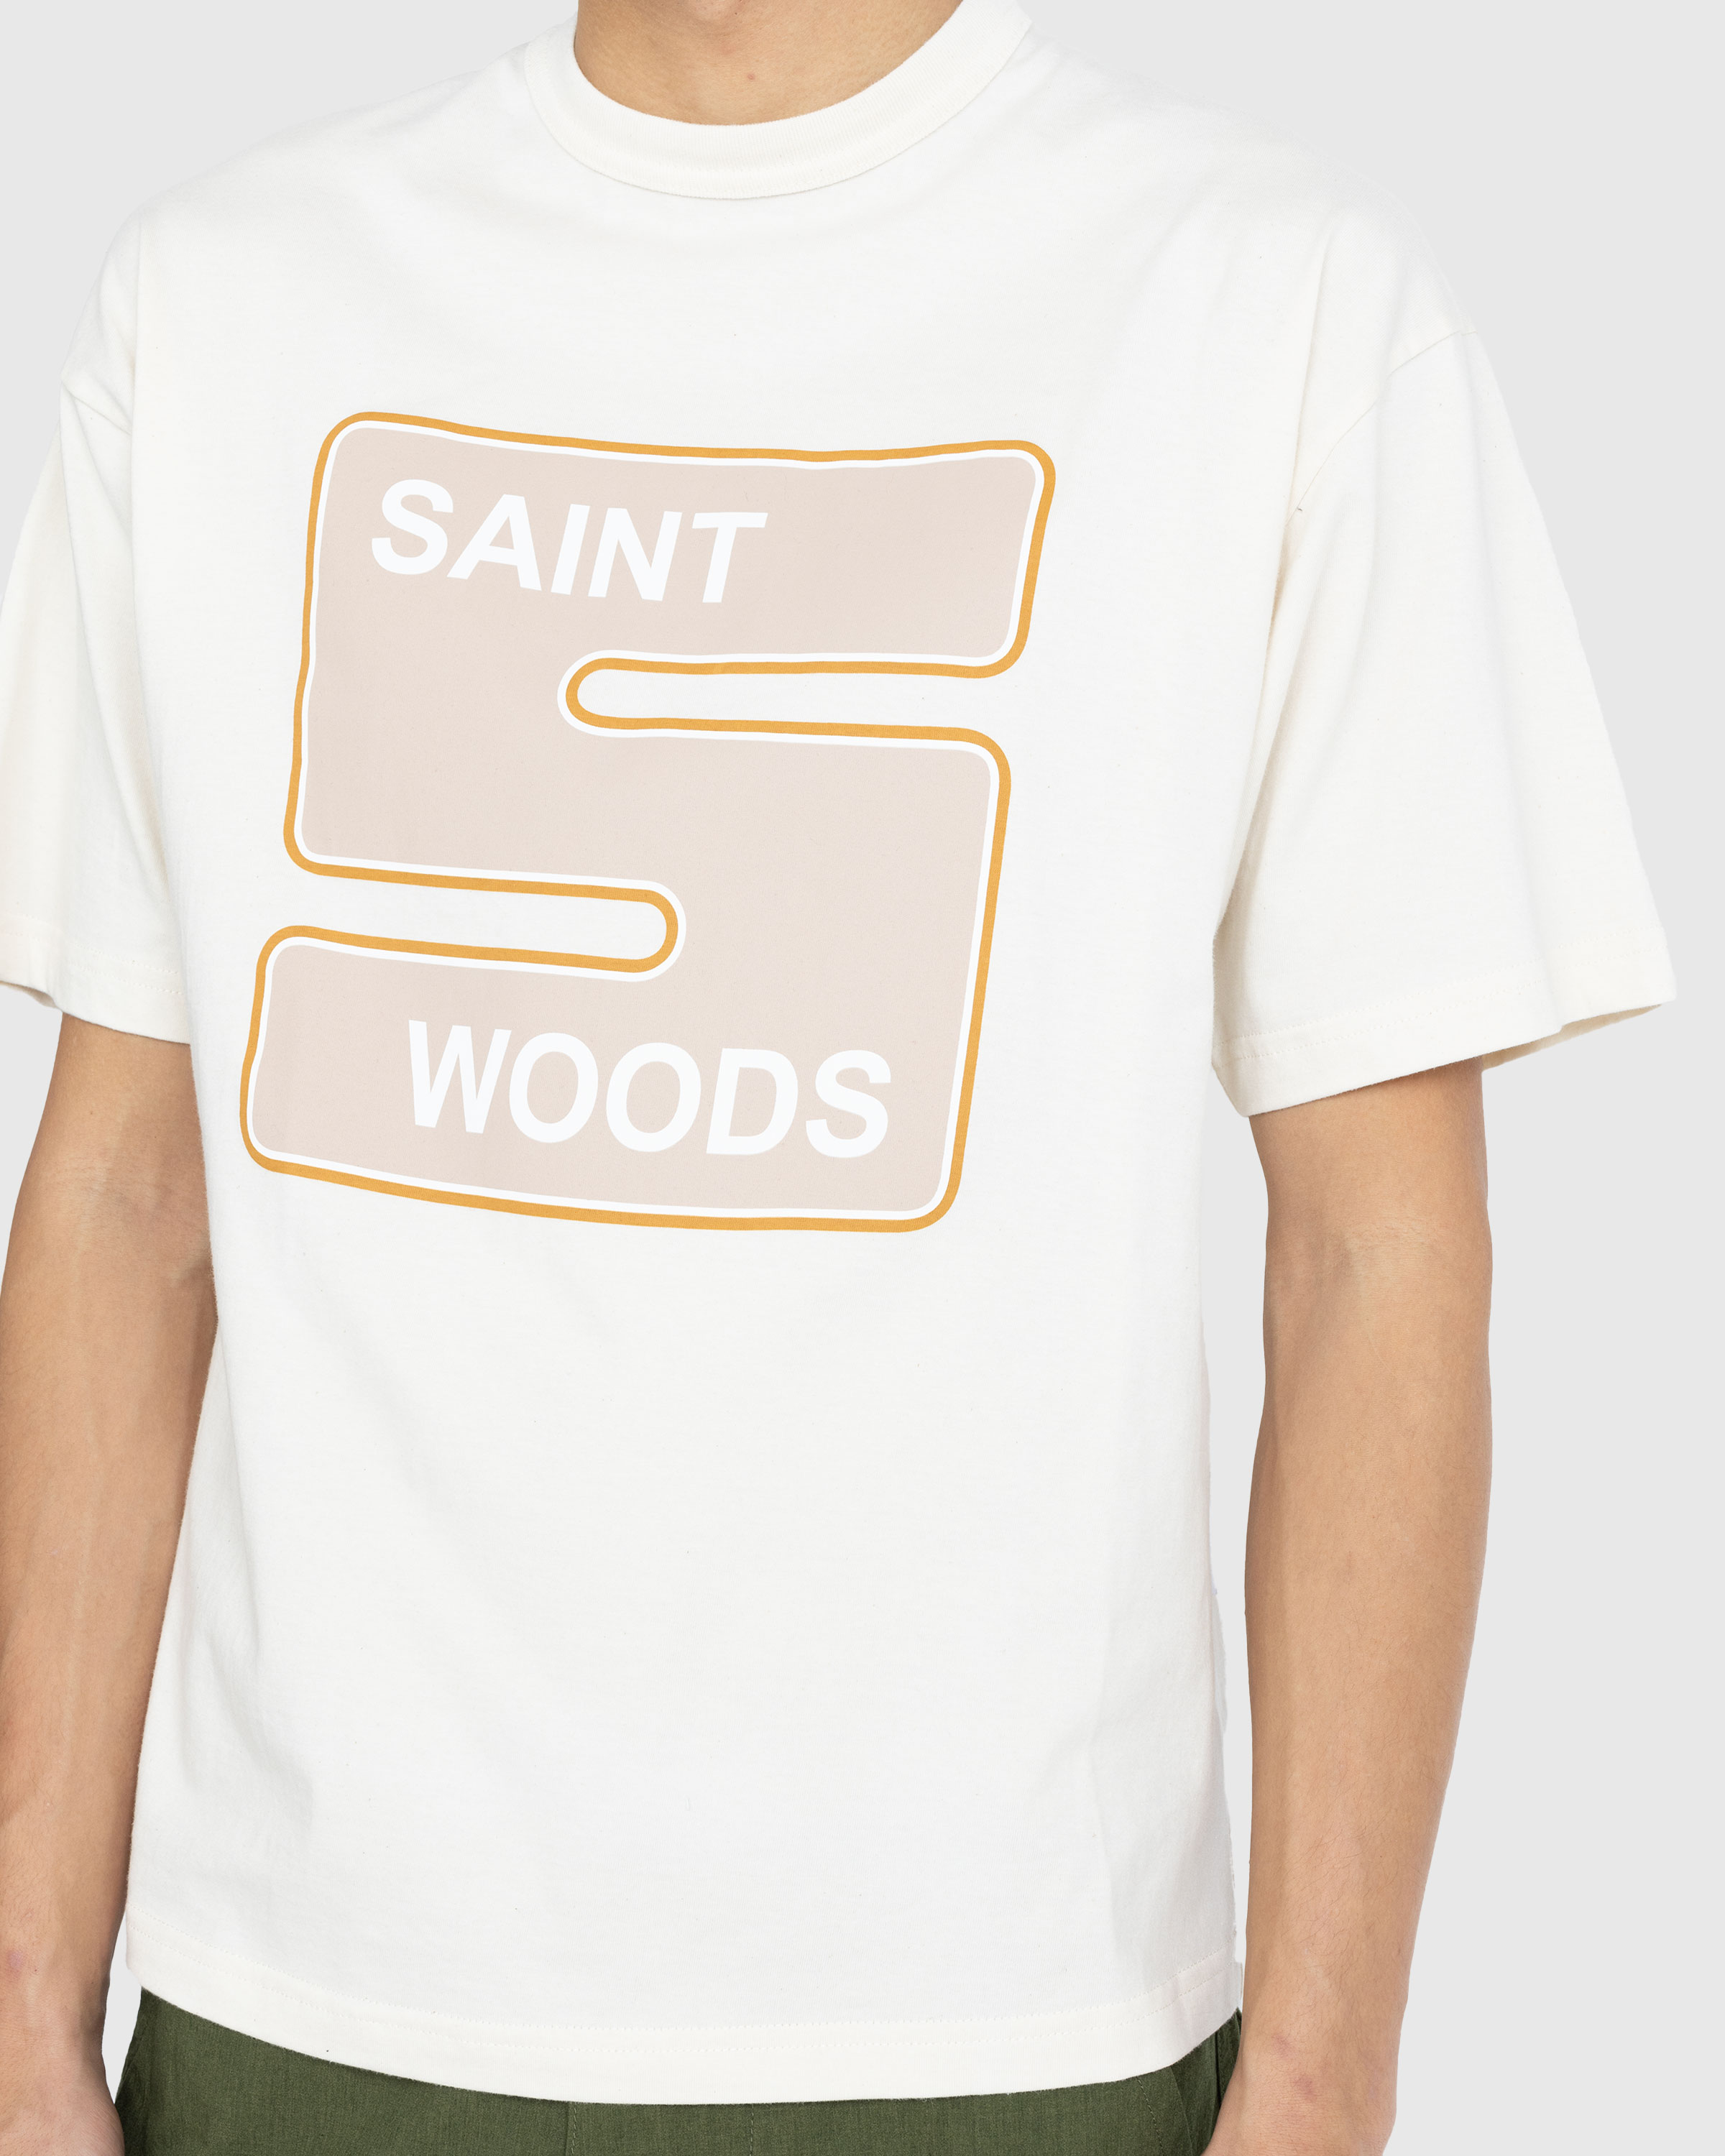 Saintwoods - You Go Tee Natural - Clothing - Beige - Image 5